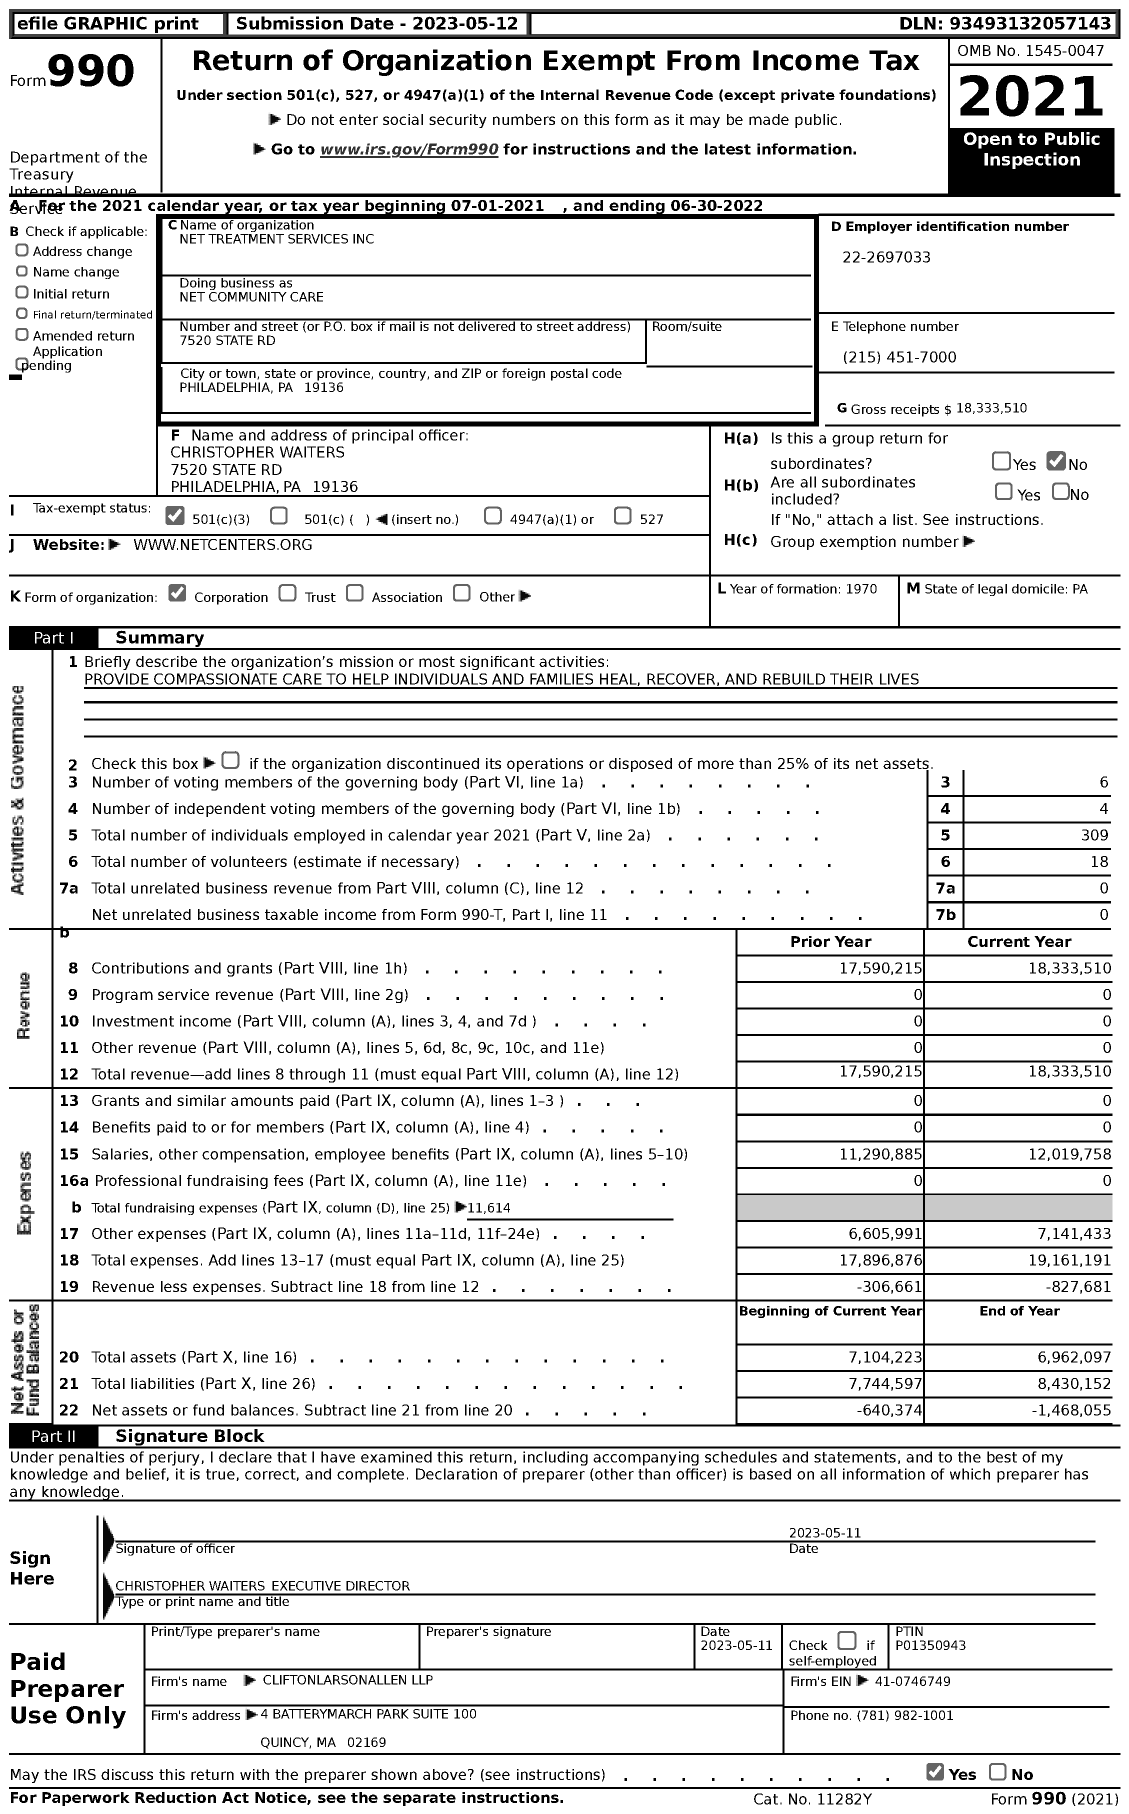 Image of first page of 2021 Form 990 for Net Community Care (NET)